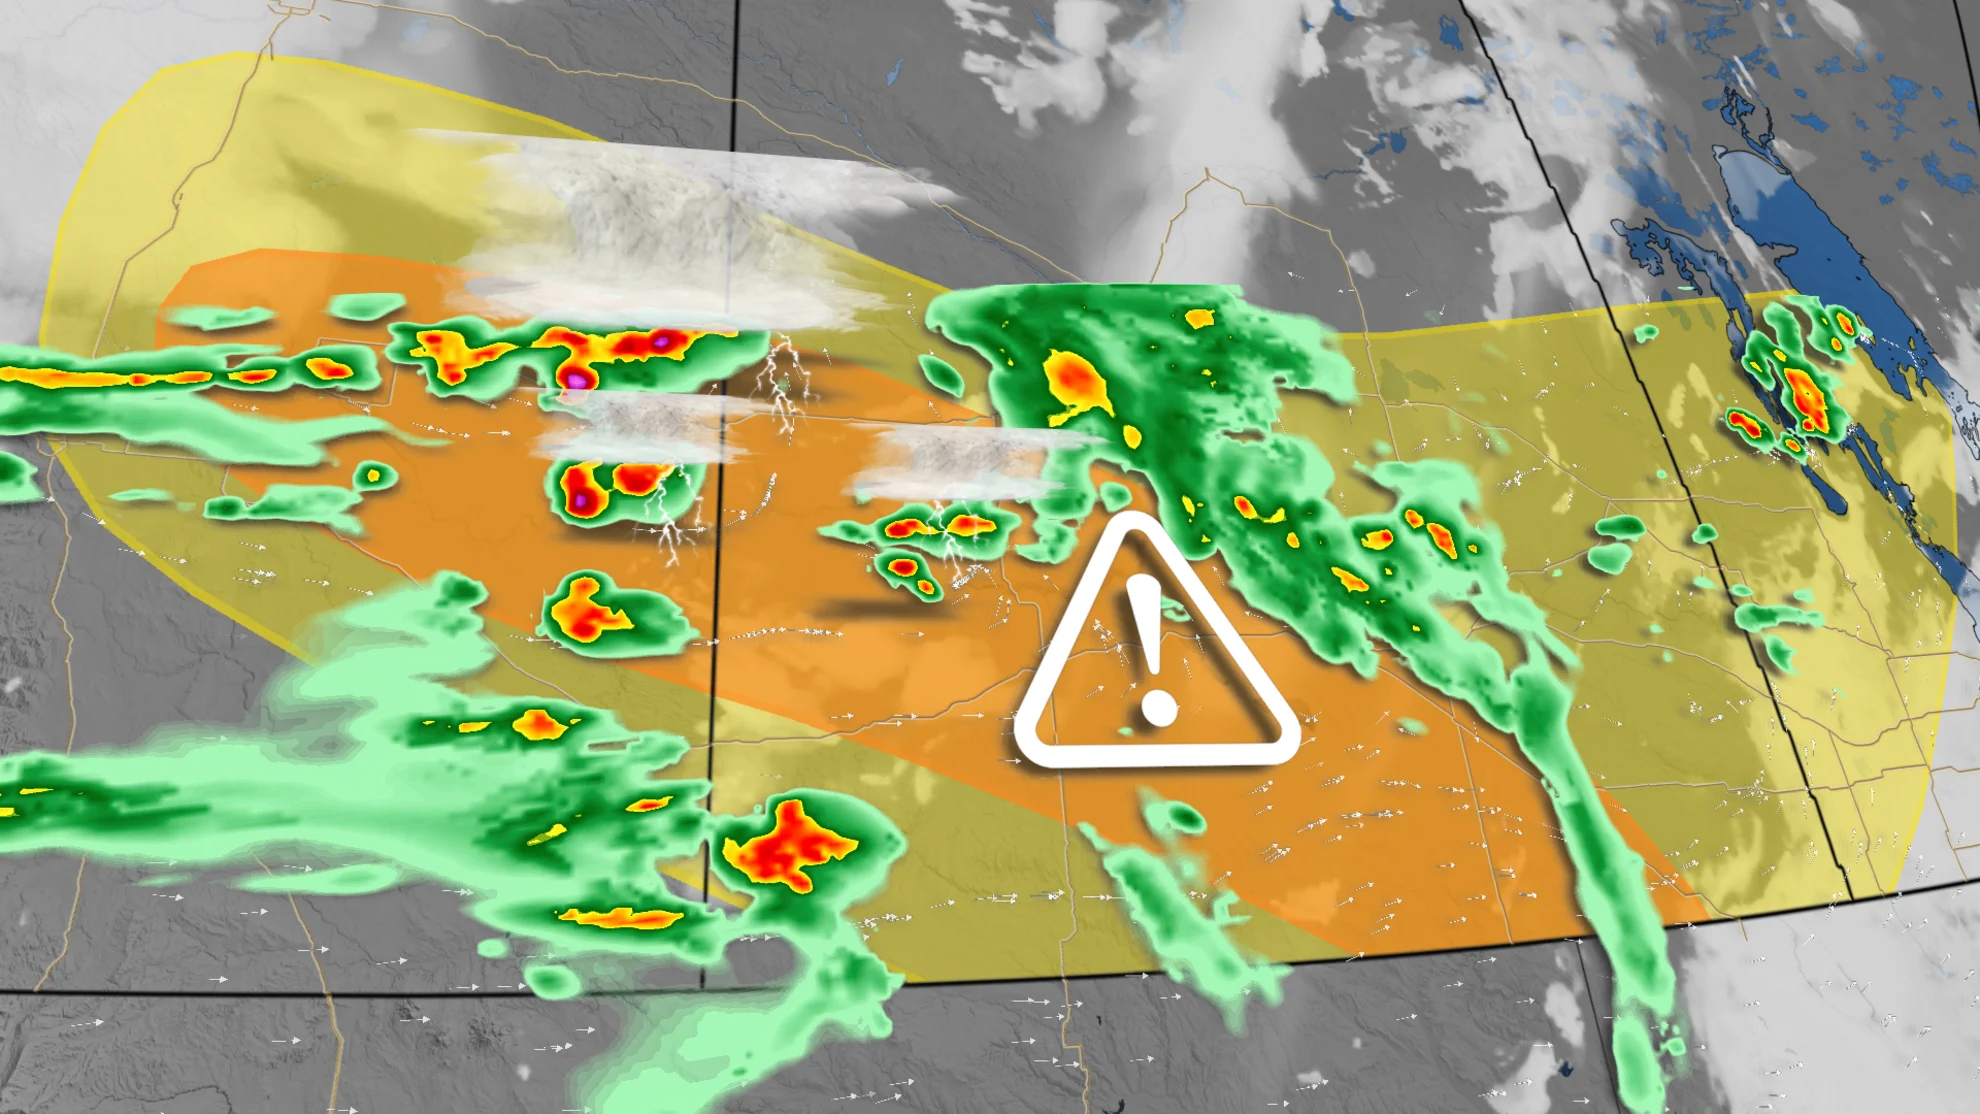 Severe thunderstorms, capable of producing large hail and damaging winds, possible in southern Manitoba, including Winnipeg, Friday. Here's what you need to know